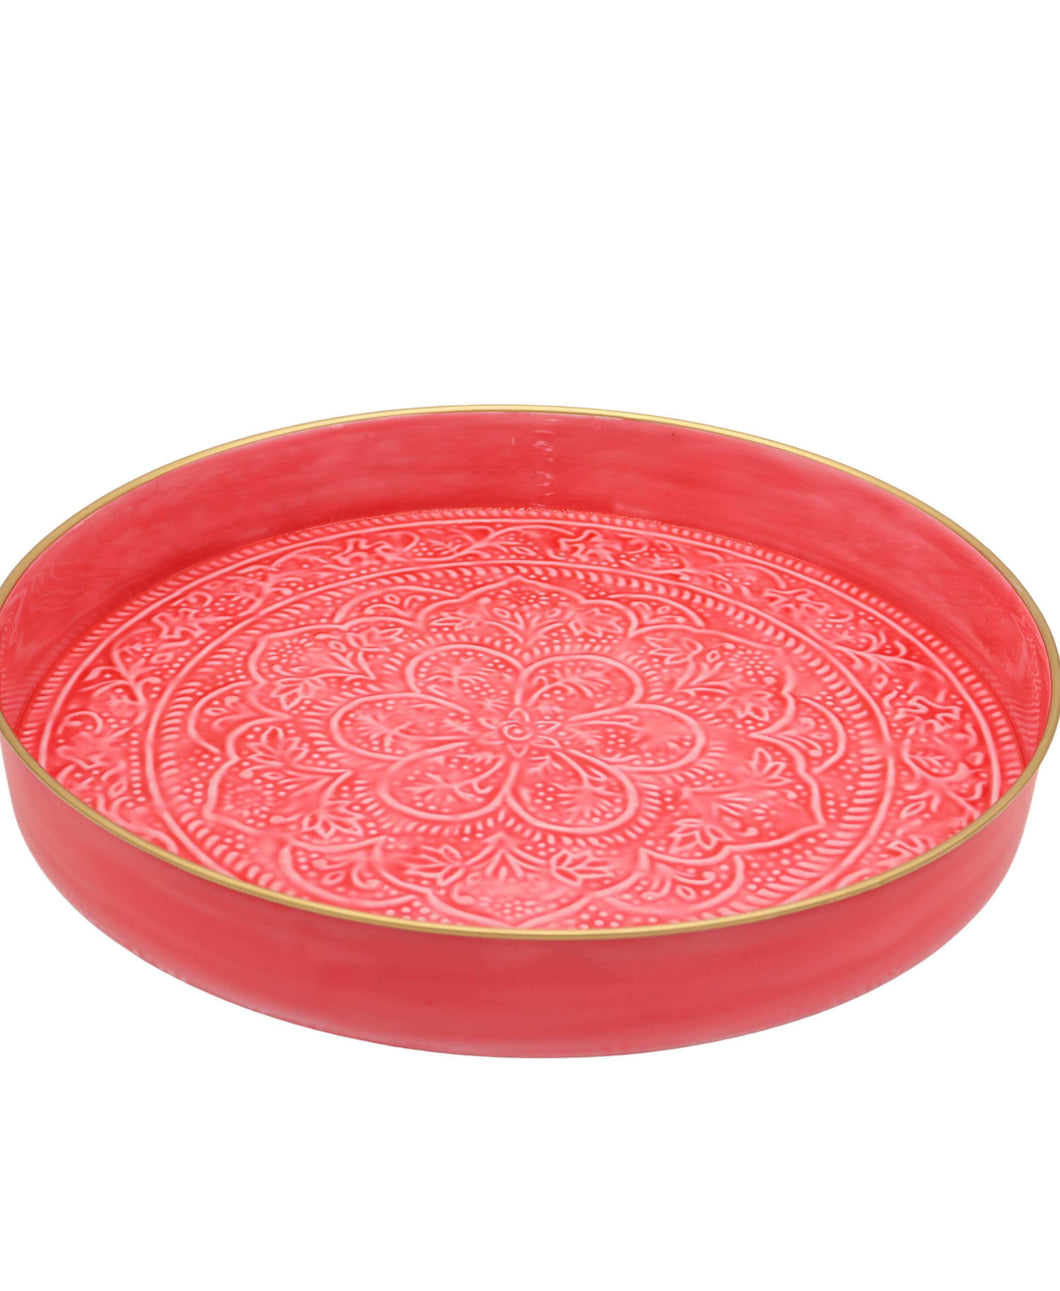 Large Round Bright Pink Tray